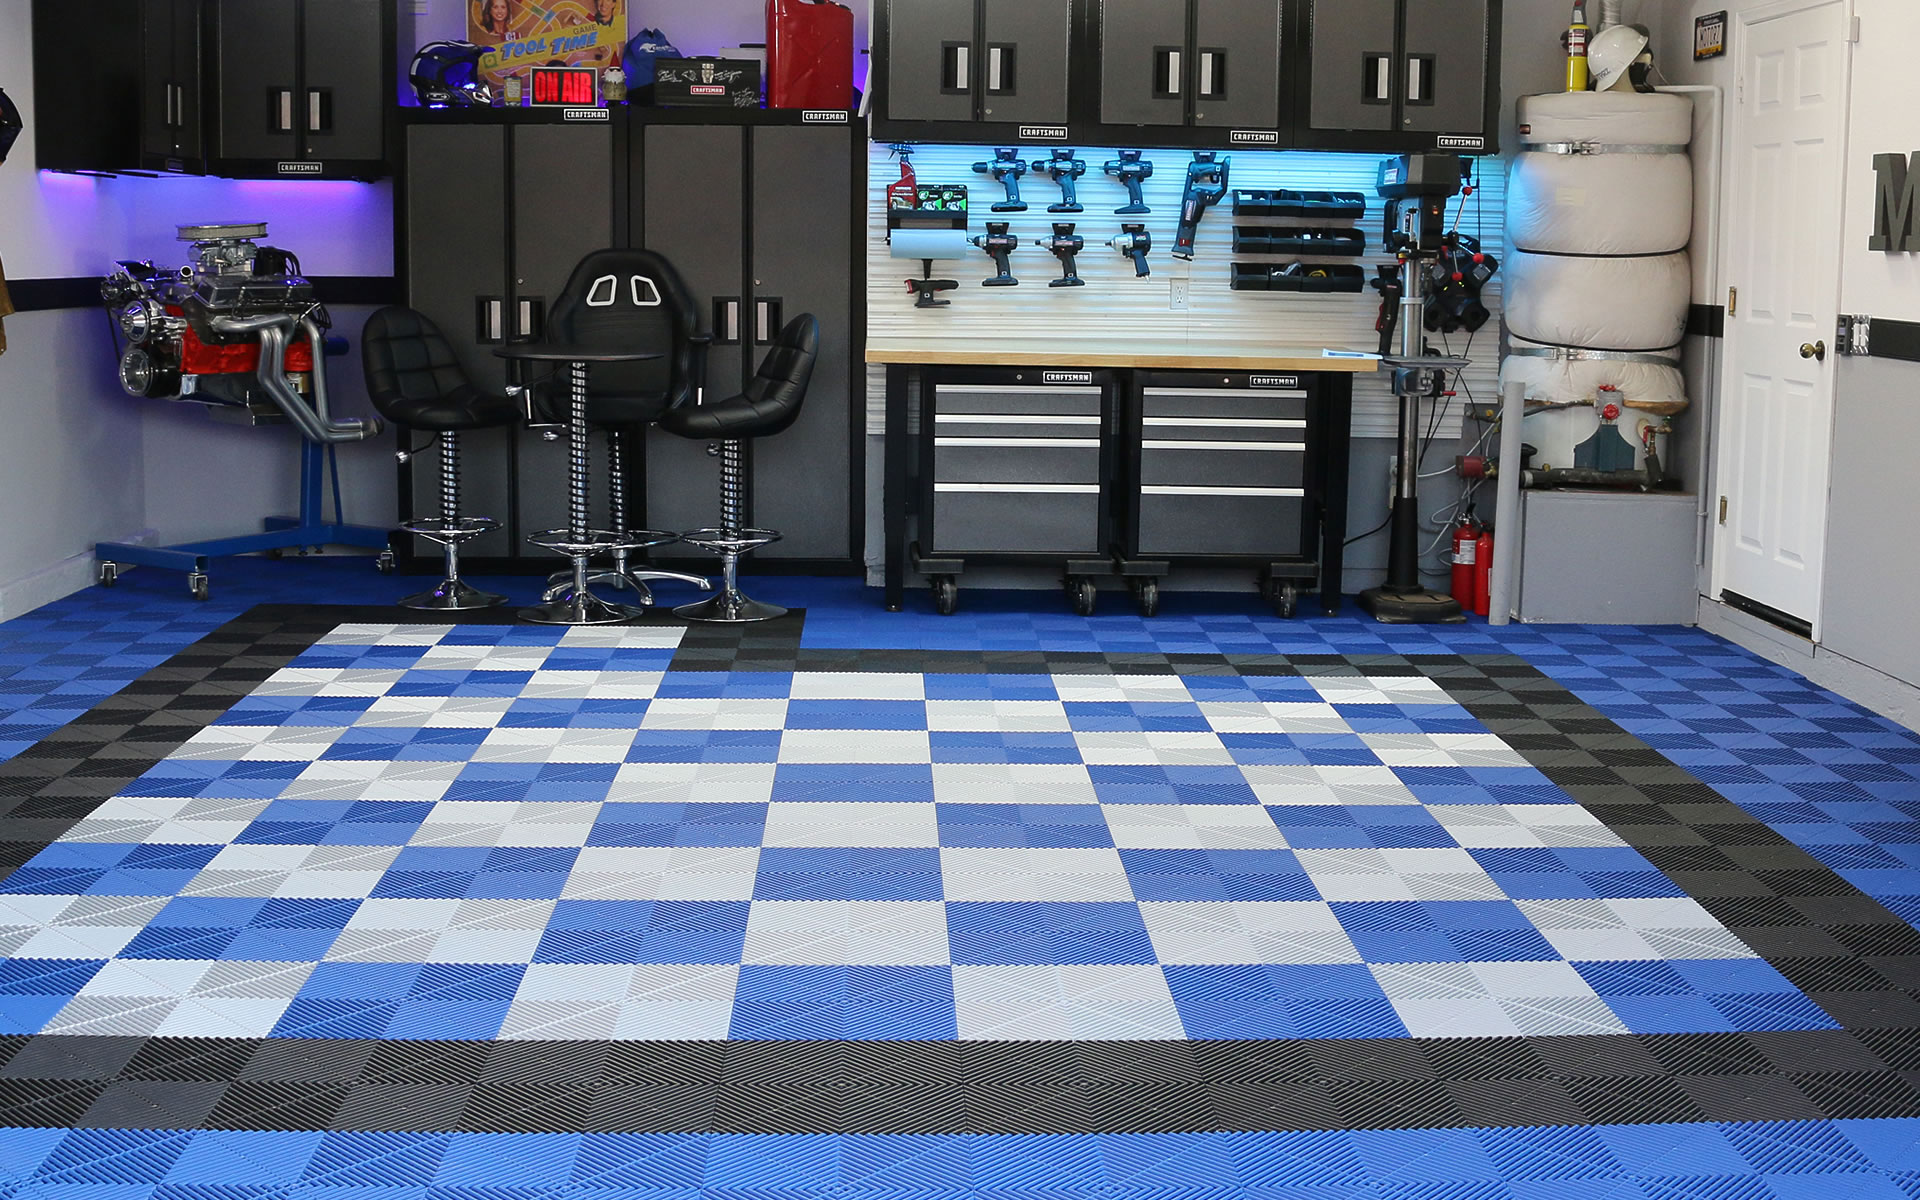 Garage floor with blue black and white colers